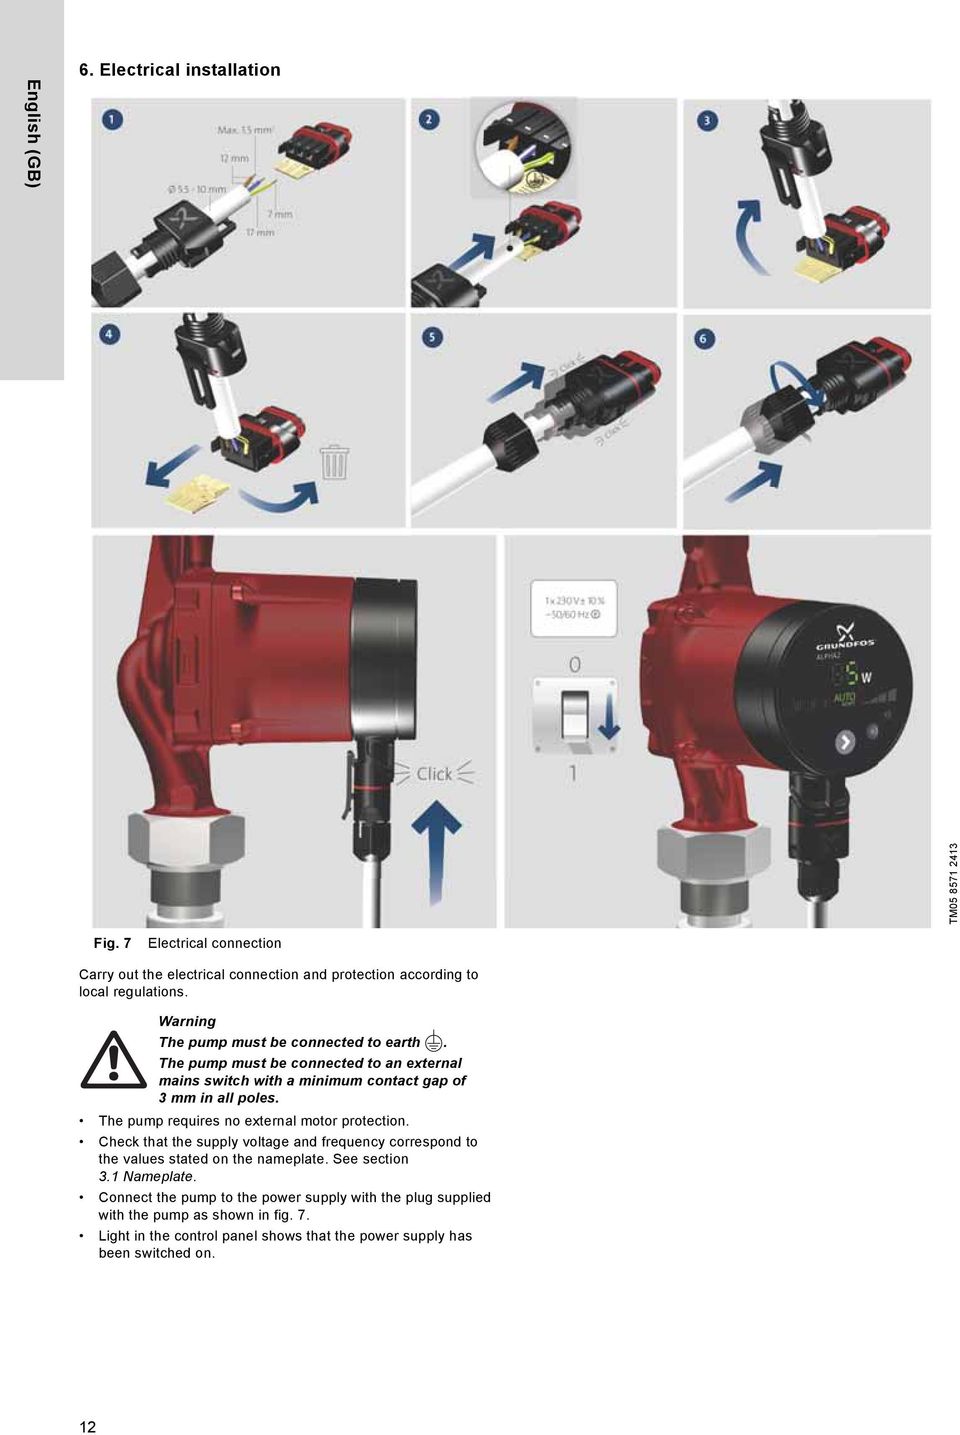 The pump must be connected to an external mains switch with a minimum contact gap of 3 mm in all poles. The pump requires no external motor protection.